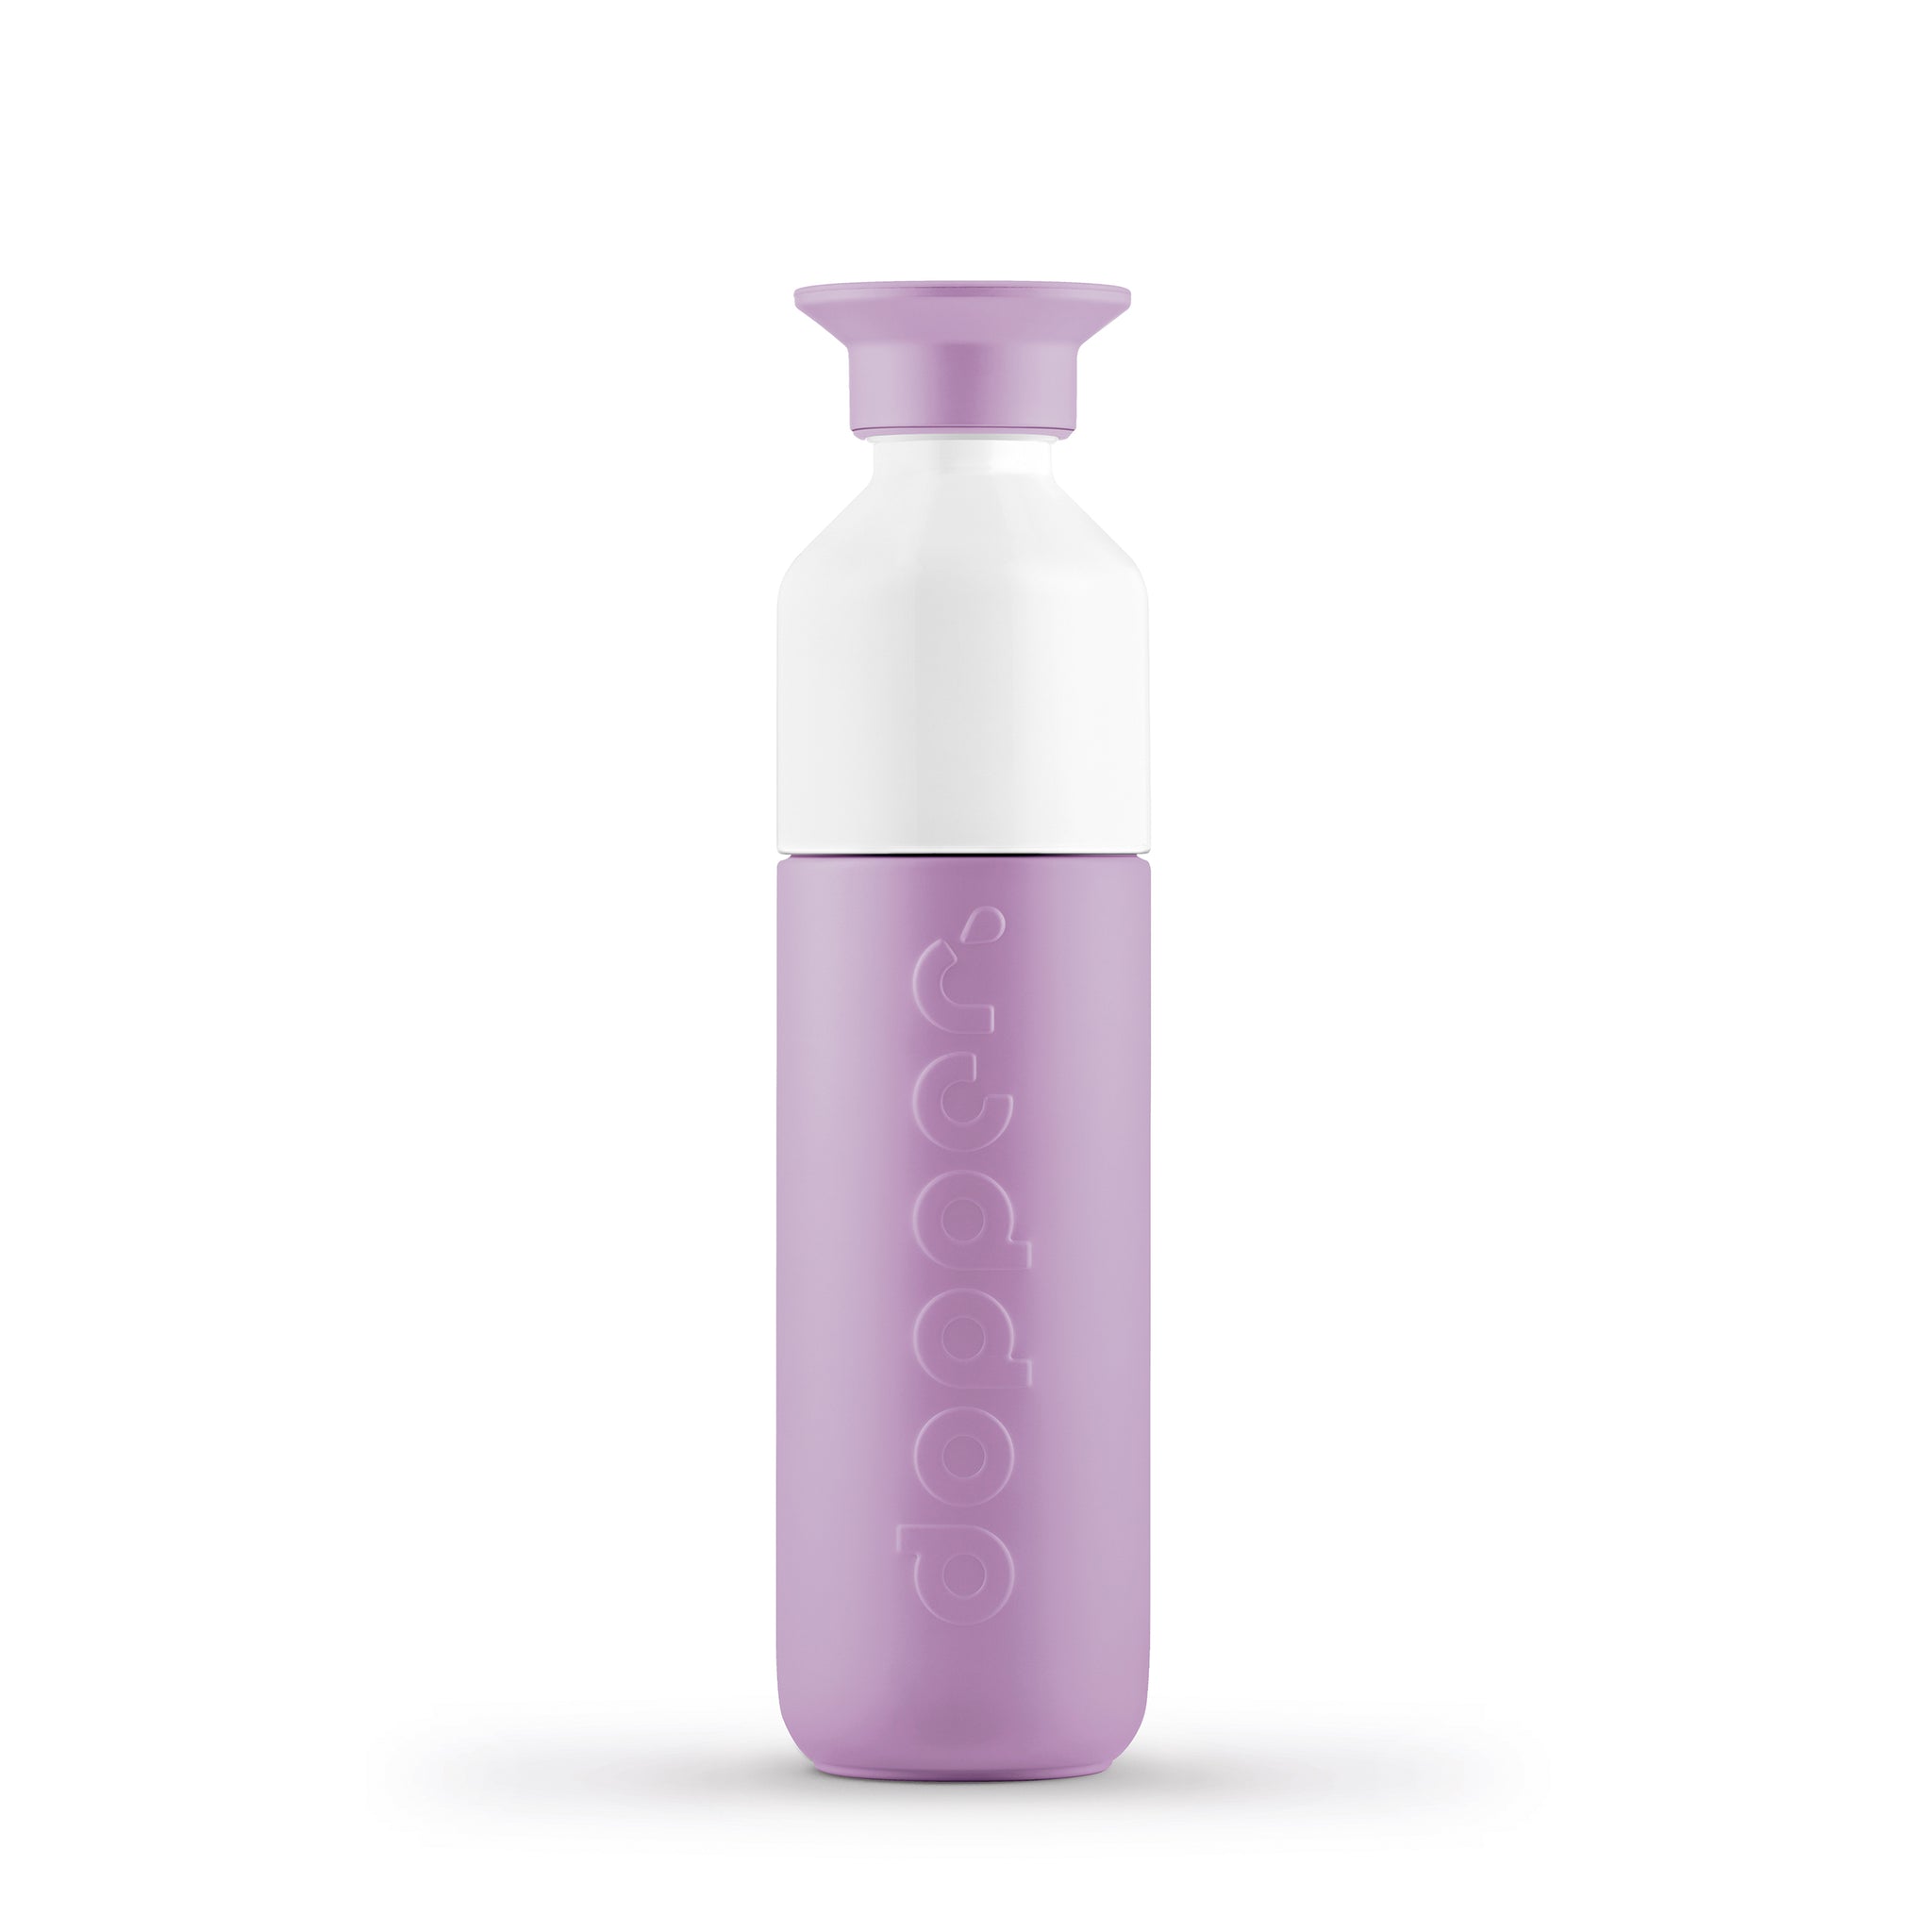 Dopper Insulated large Throwback Lilac│Thermosfles 580ml│art. 4435│voorkant met witte achtergrond